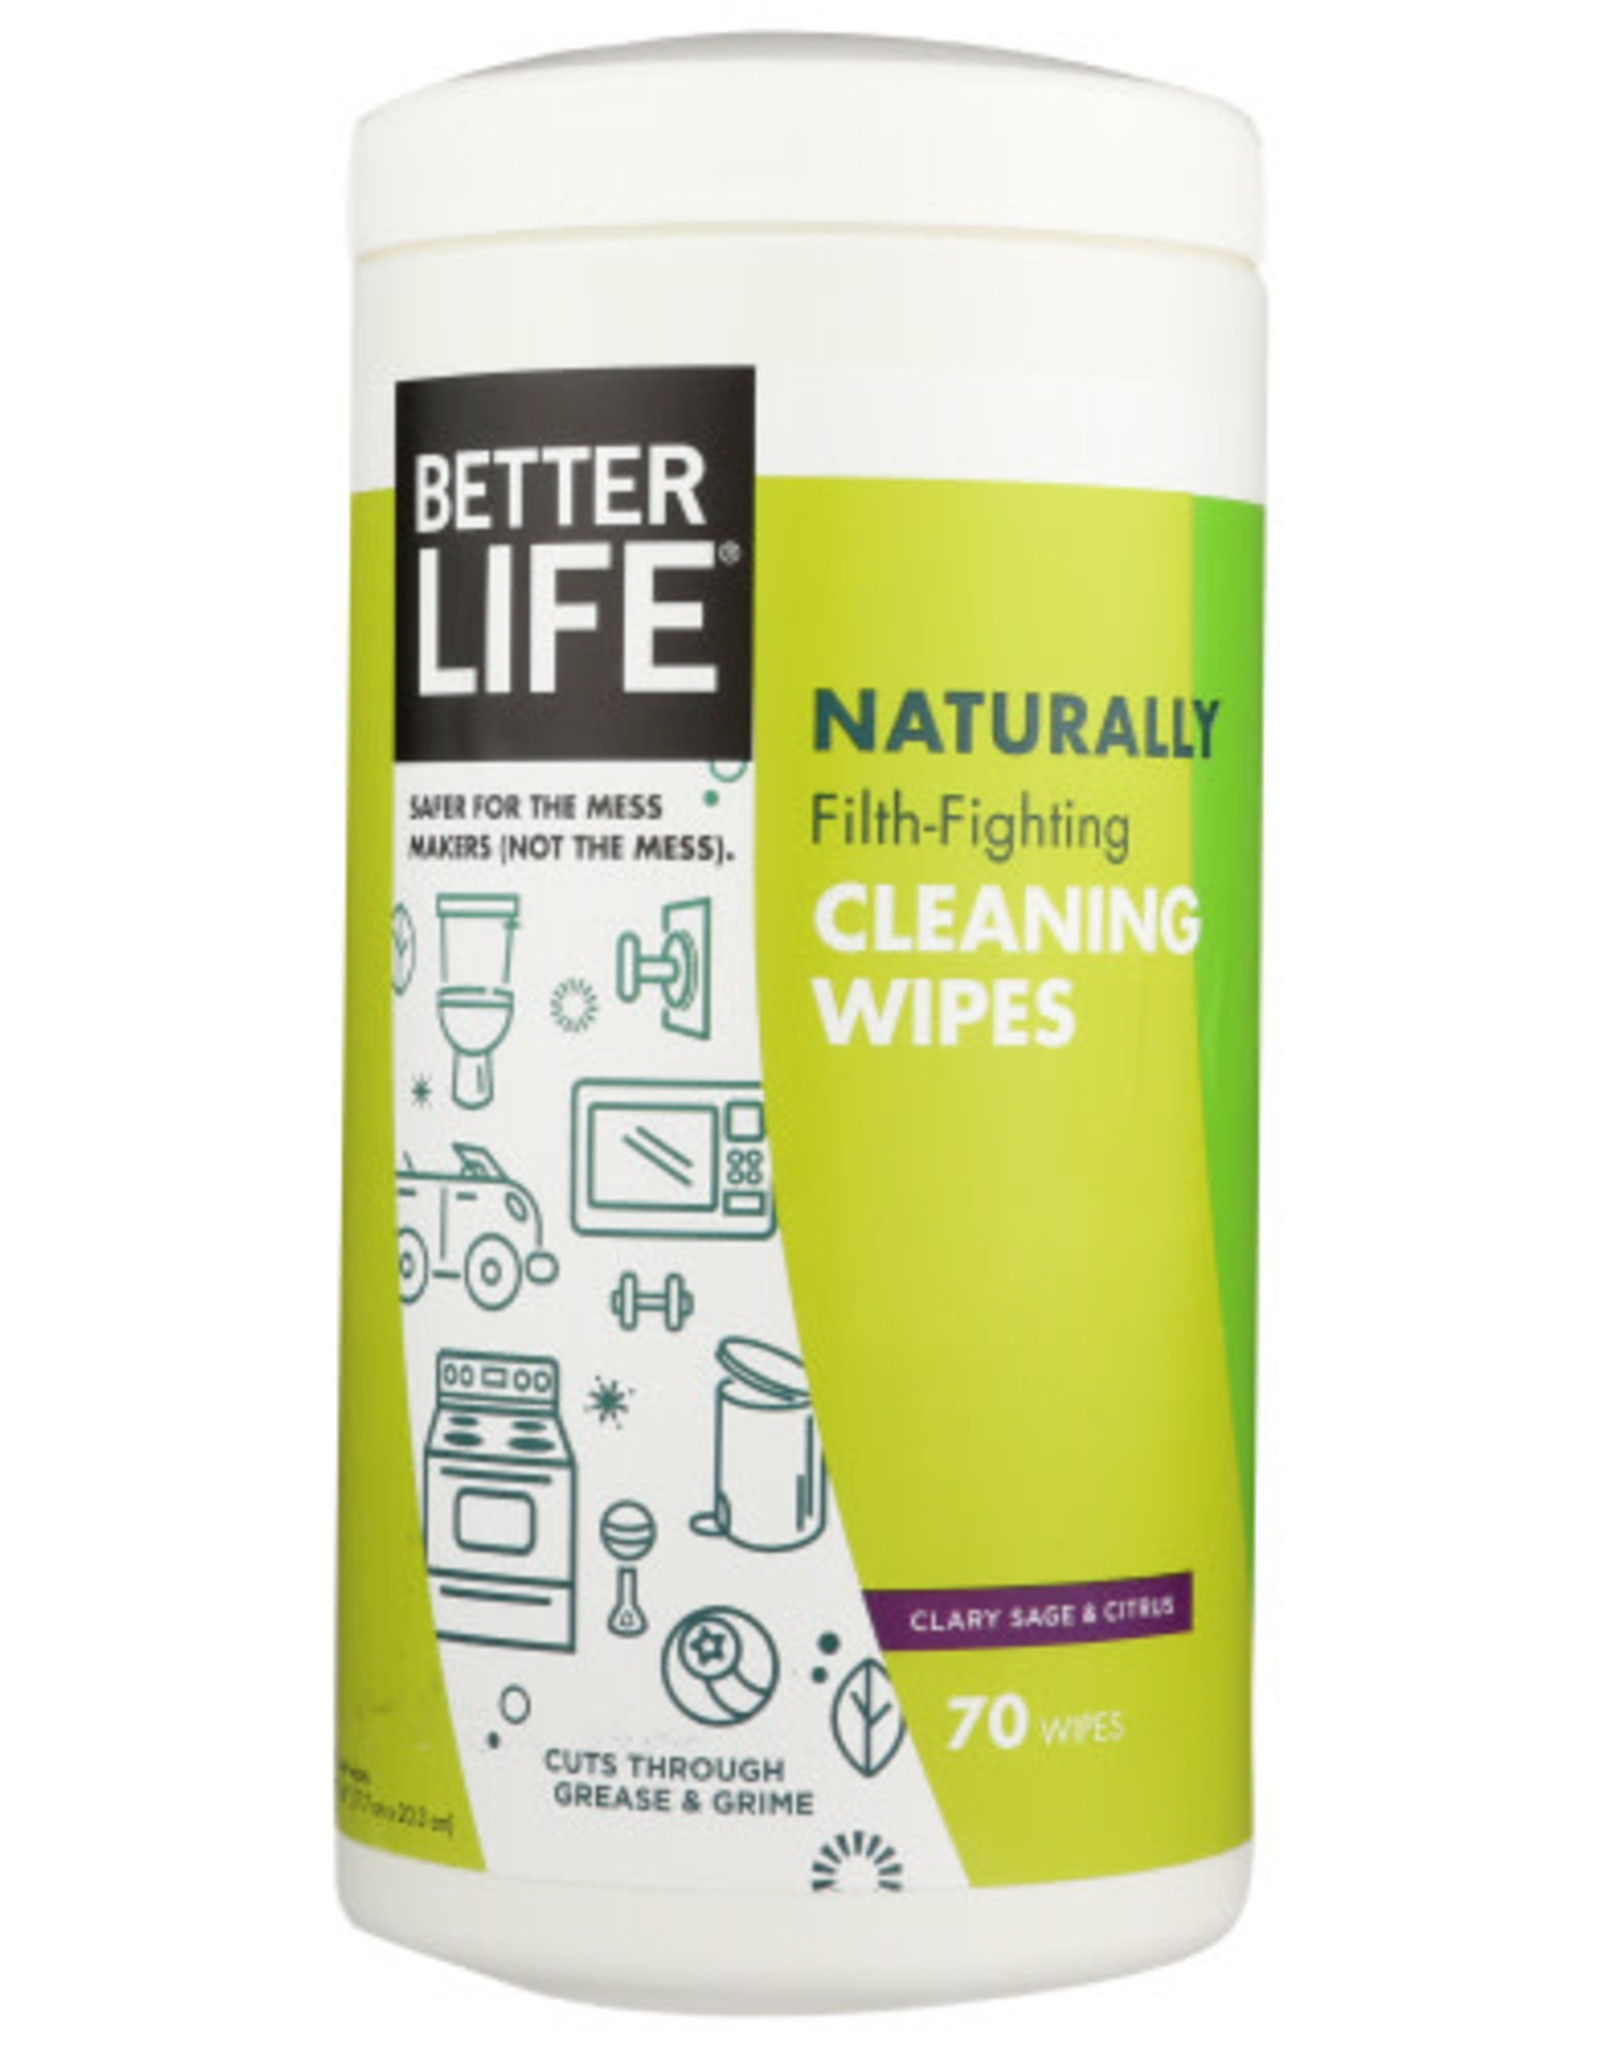 BETTER LIFE BETTER LIFE CLEANING WIPES, 70 WIPES